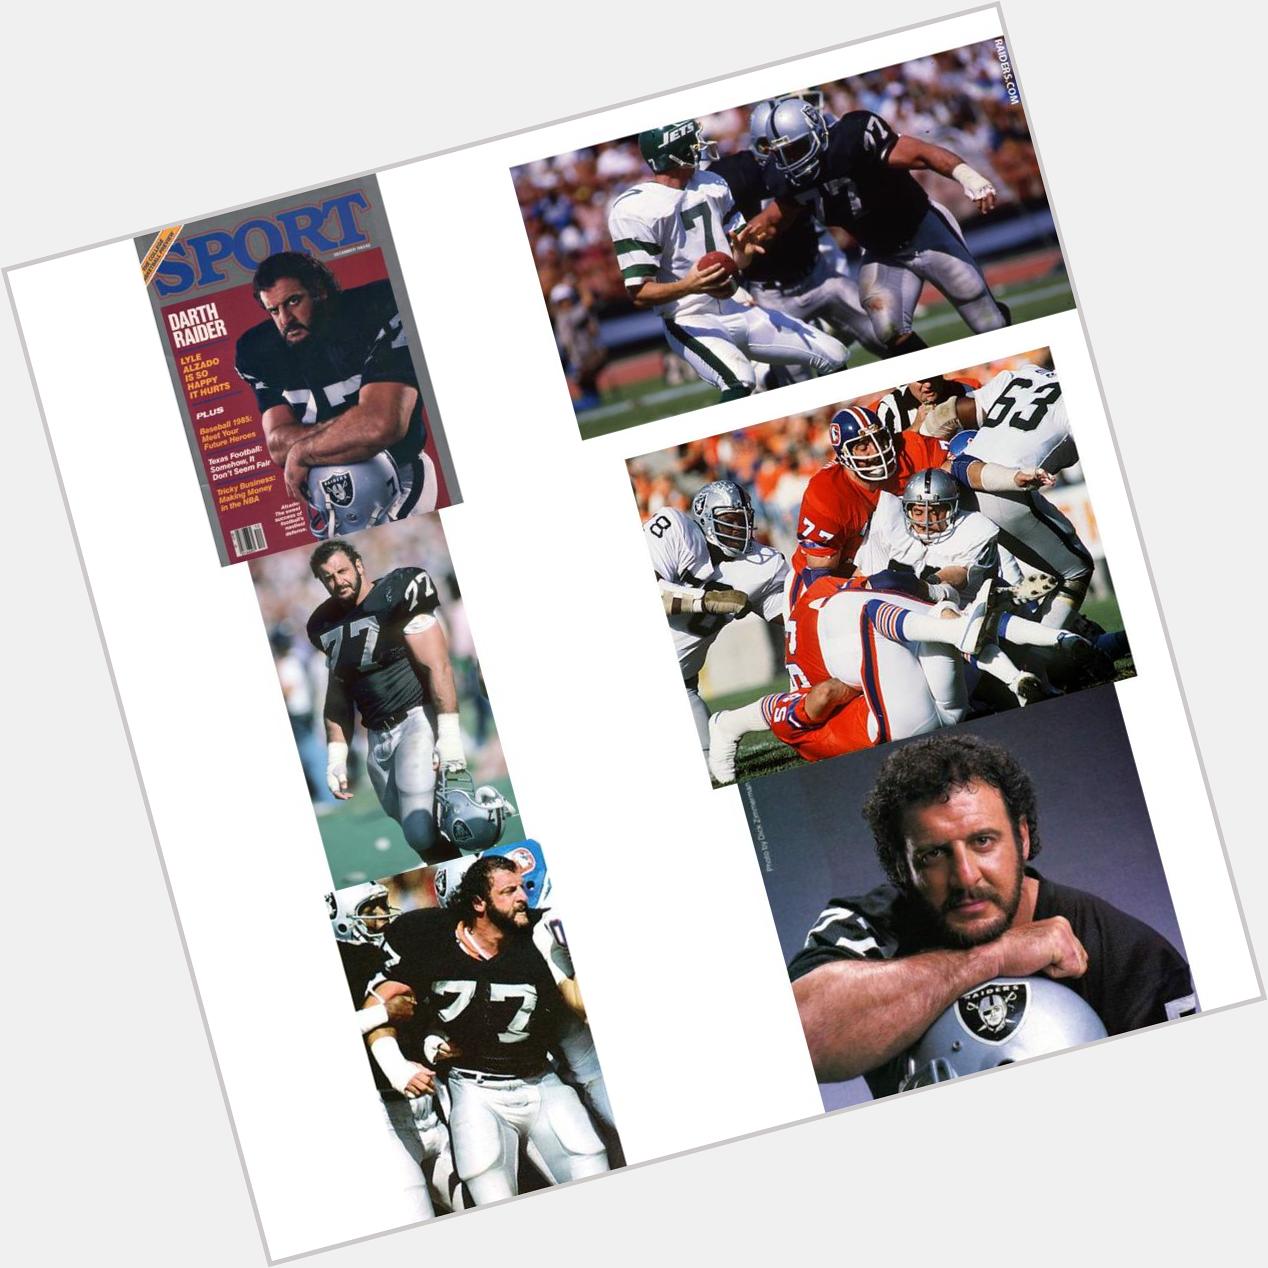 Happy birthday to Lyle Alzado one of the greatest no matter what any one says rest in peace 